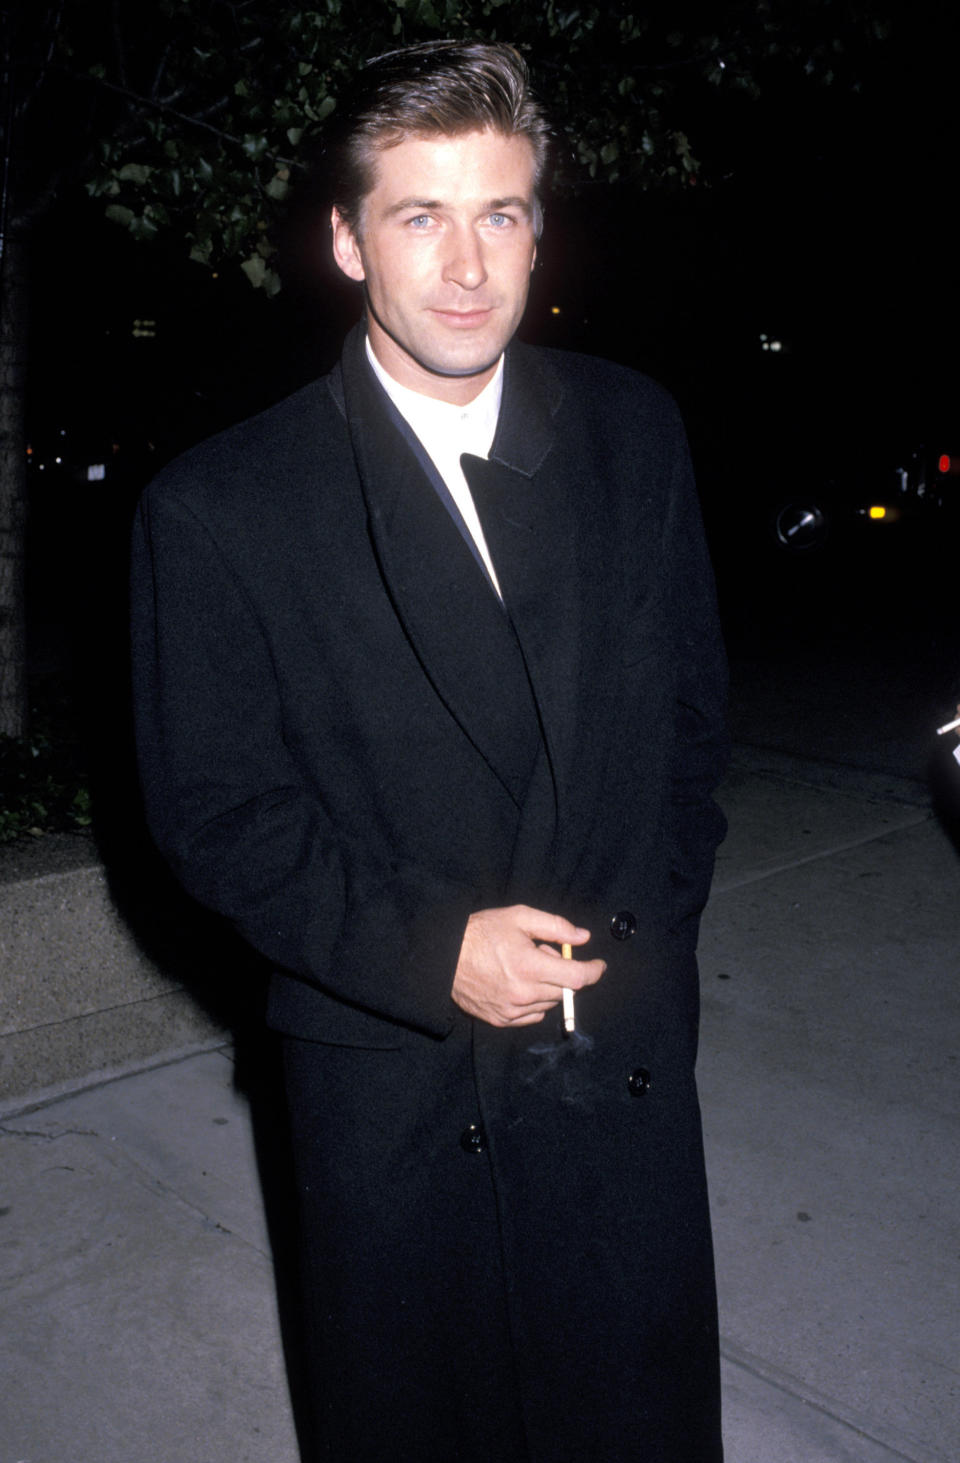 Baldwin attending a performance of "Valmont" at the Lincoln Center in New York.